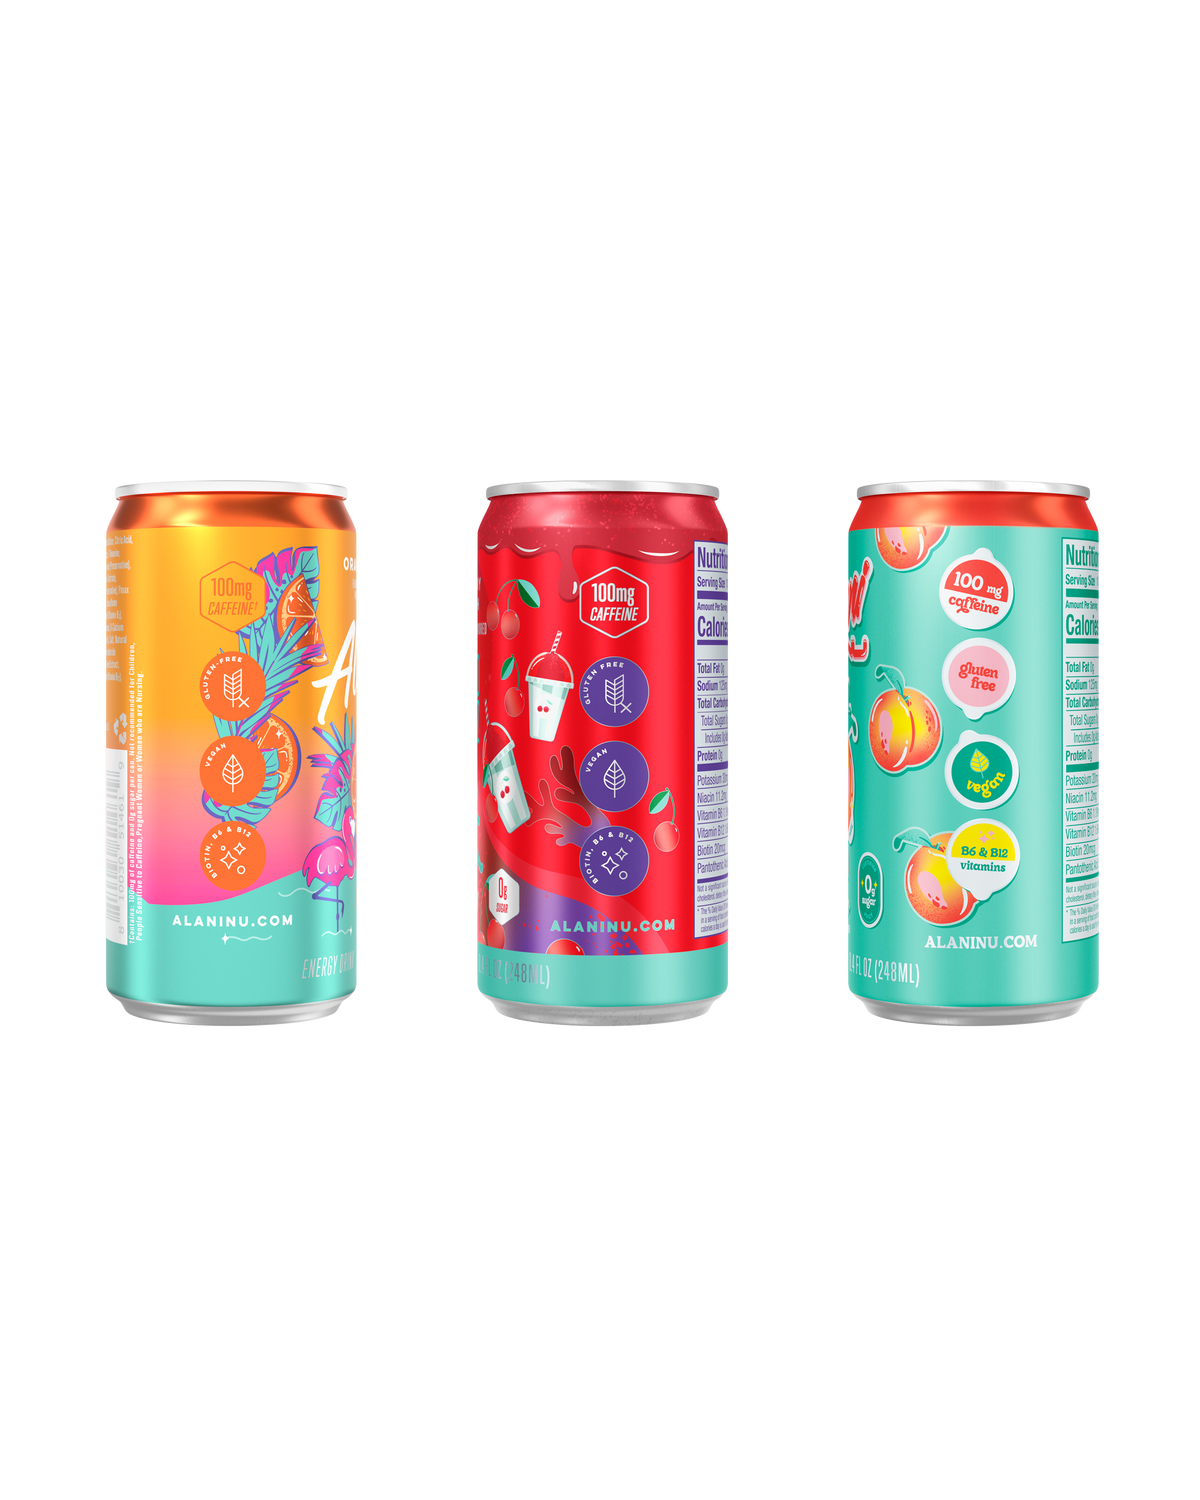 A side view of Mini Cans in flavors Orange Kiss, Cherry Slush and Juicy Peach.